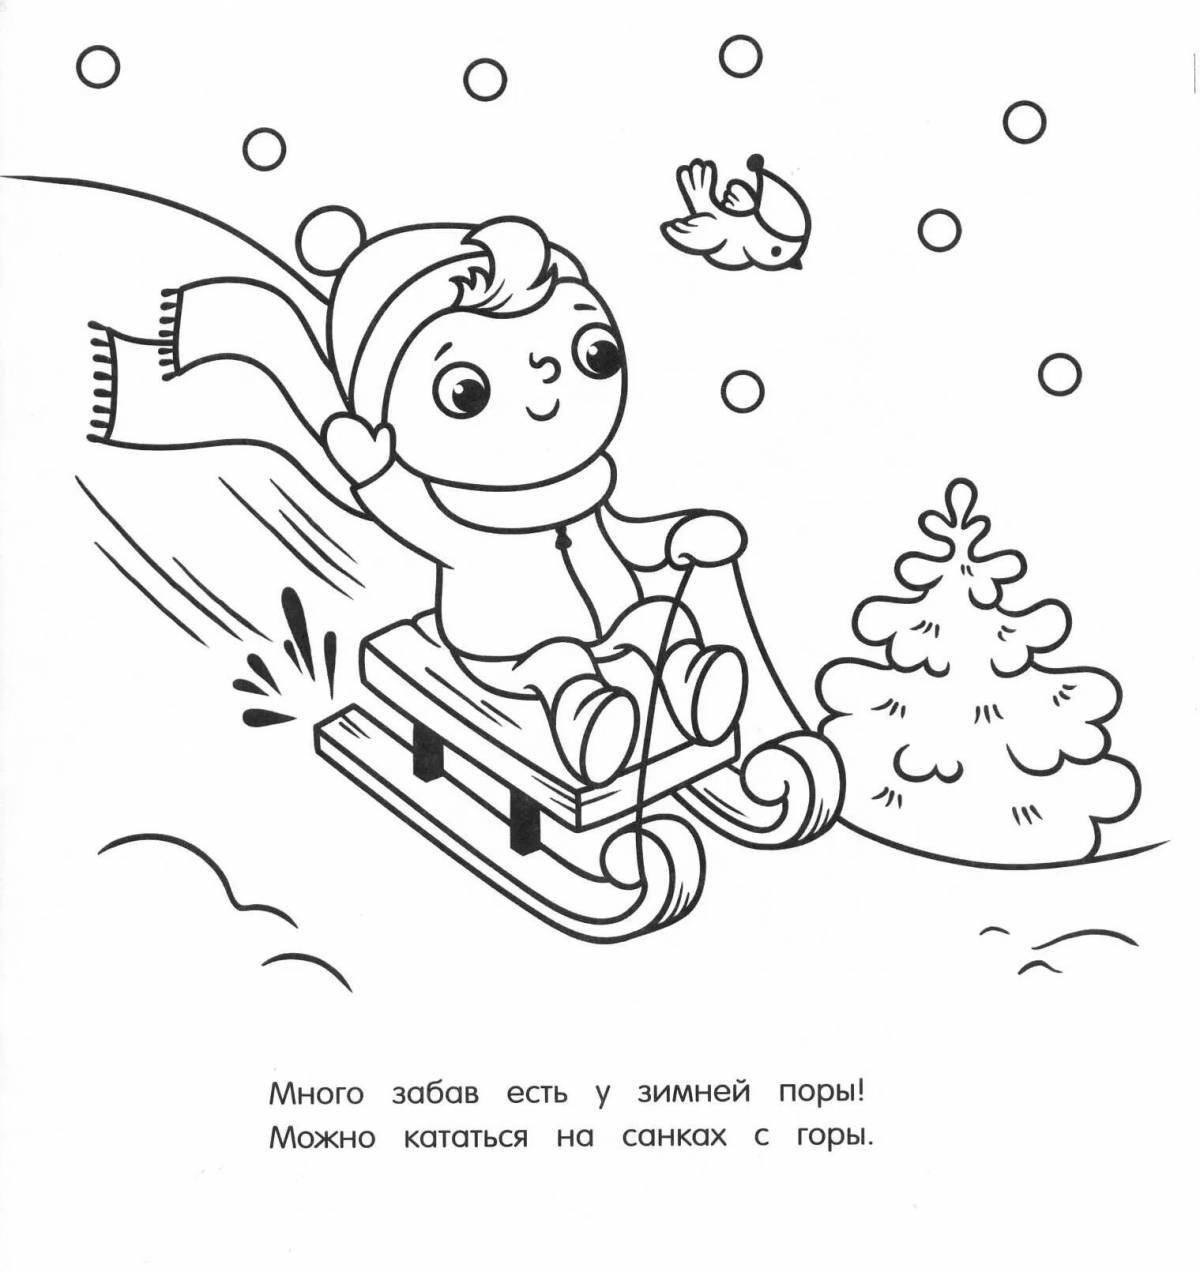 Stimulating coloring pages traffic rules in winter for kids